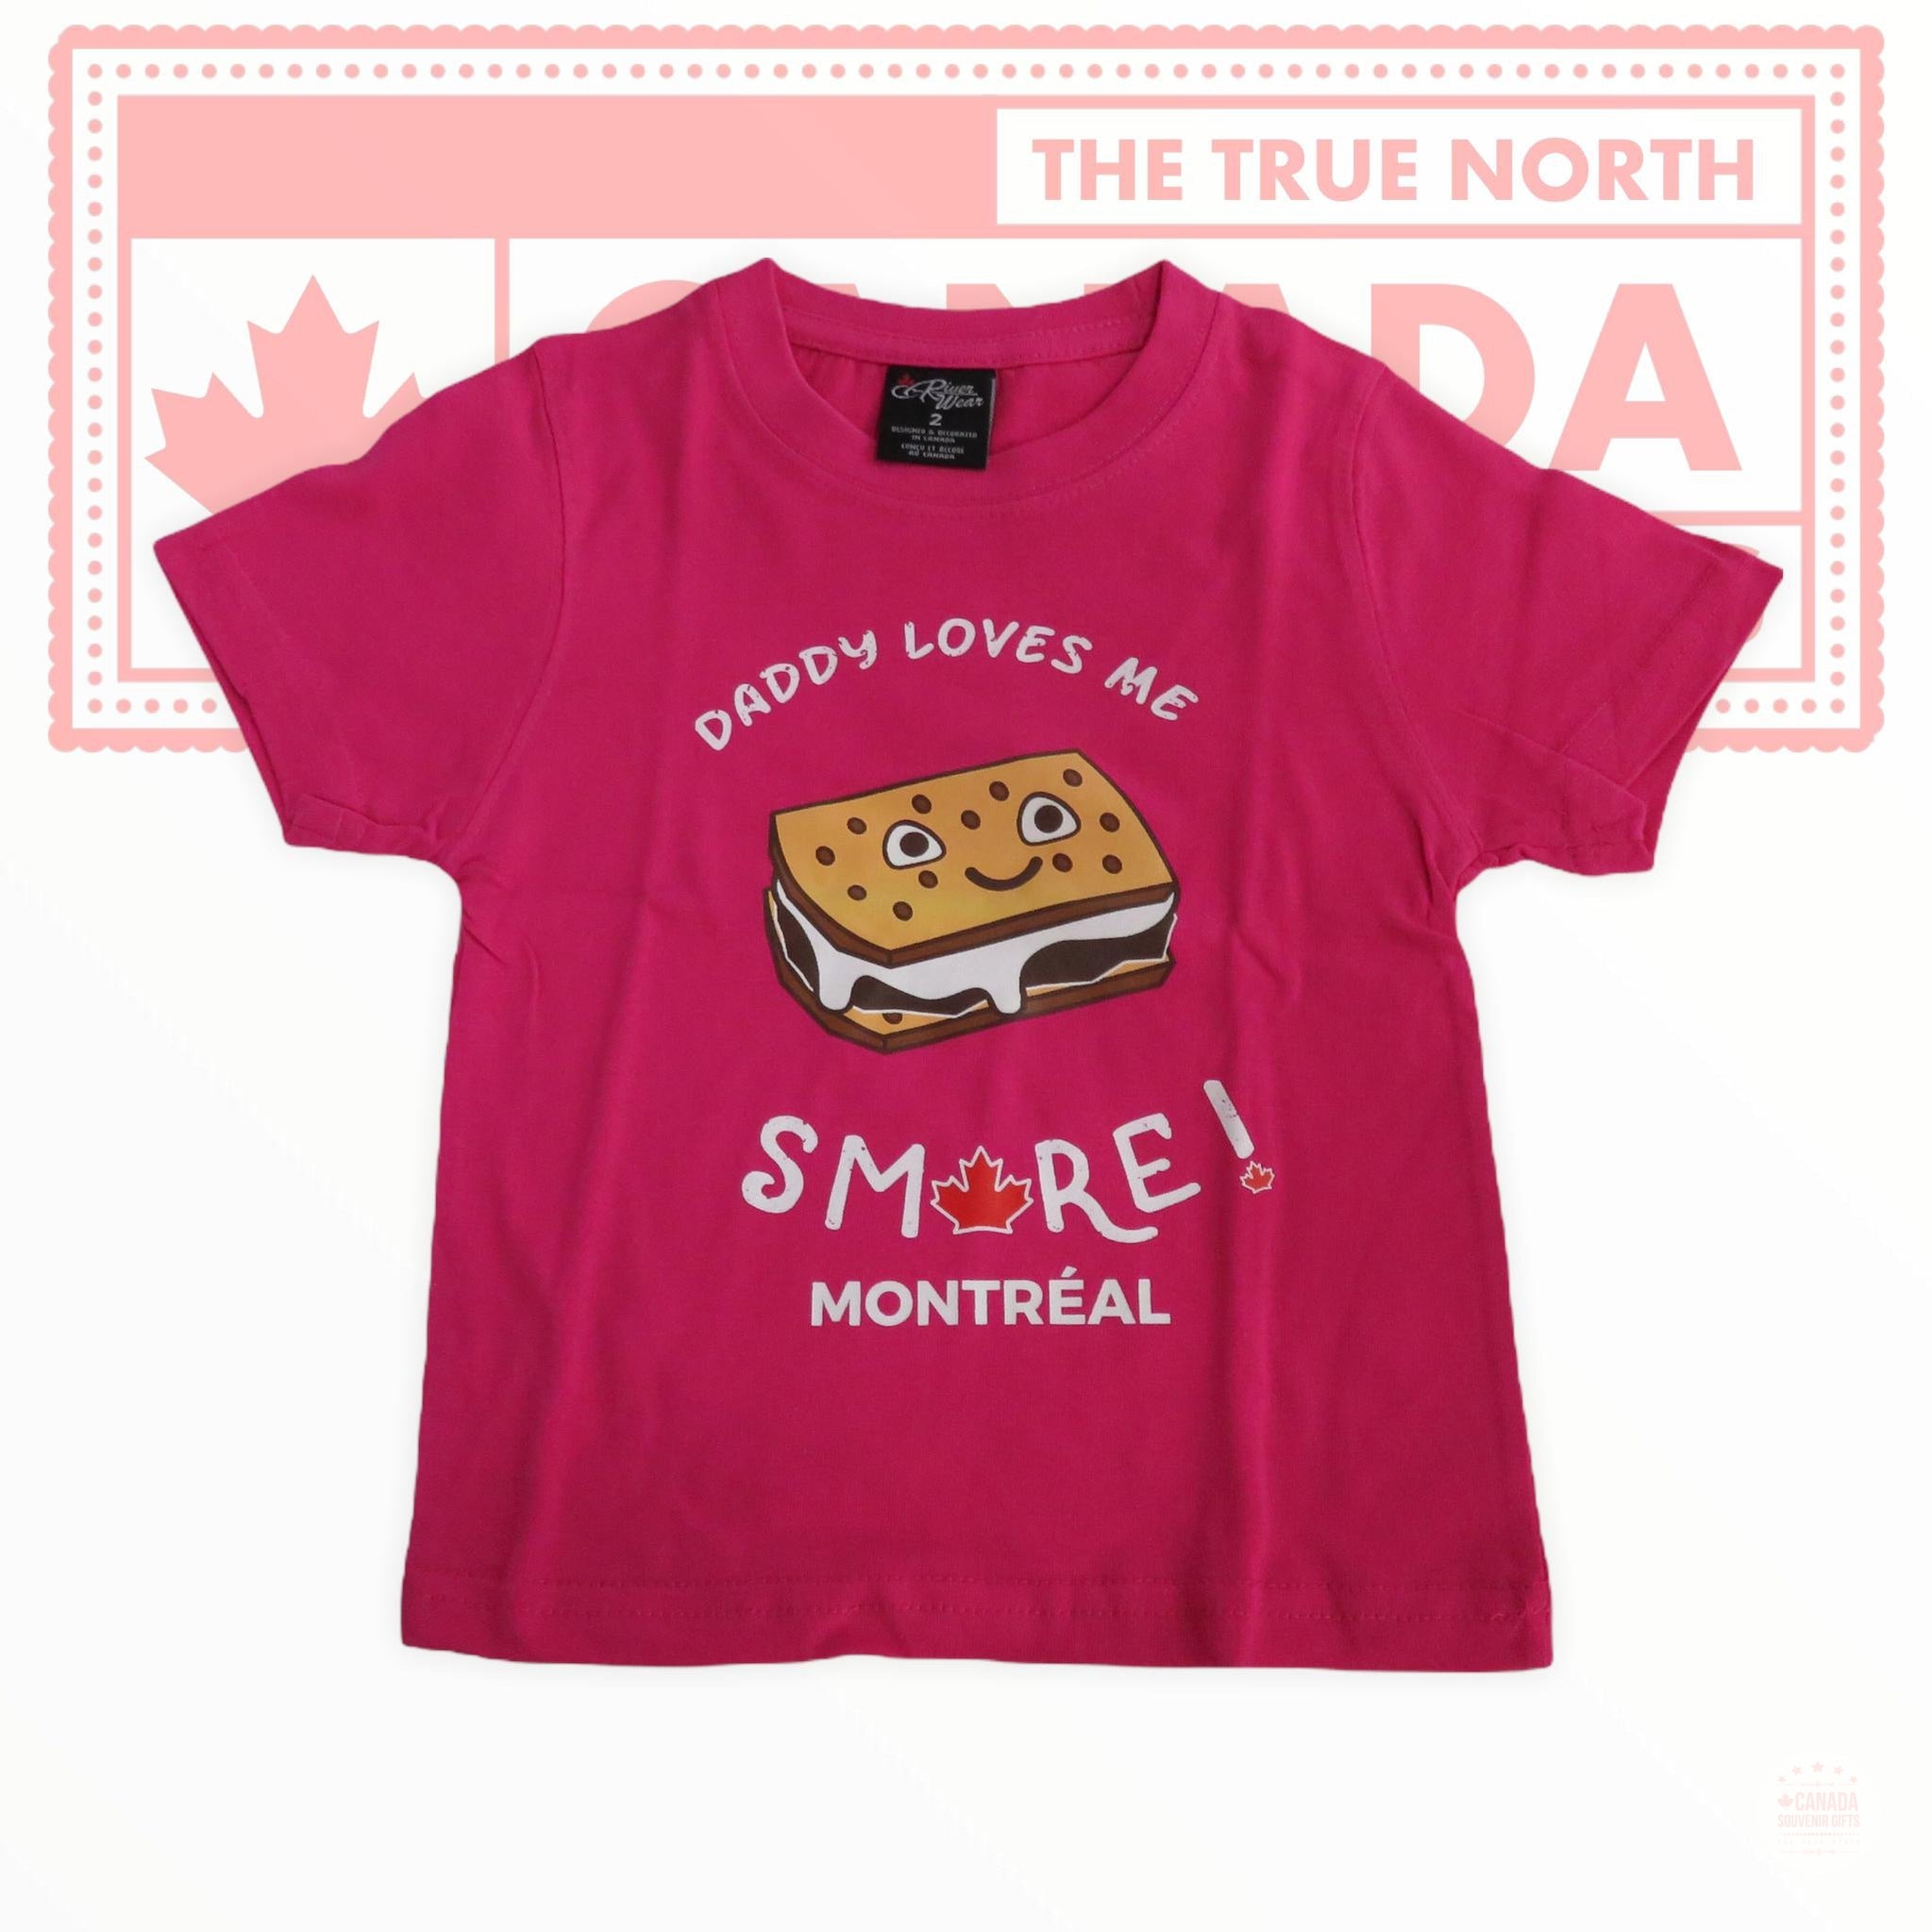 Daddy Loves Me Smore Montreal Kids T-Shirt 2-6 Years Old Girls Watermelon Color Casual Top Designed in Canada